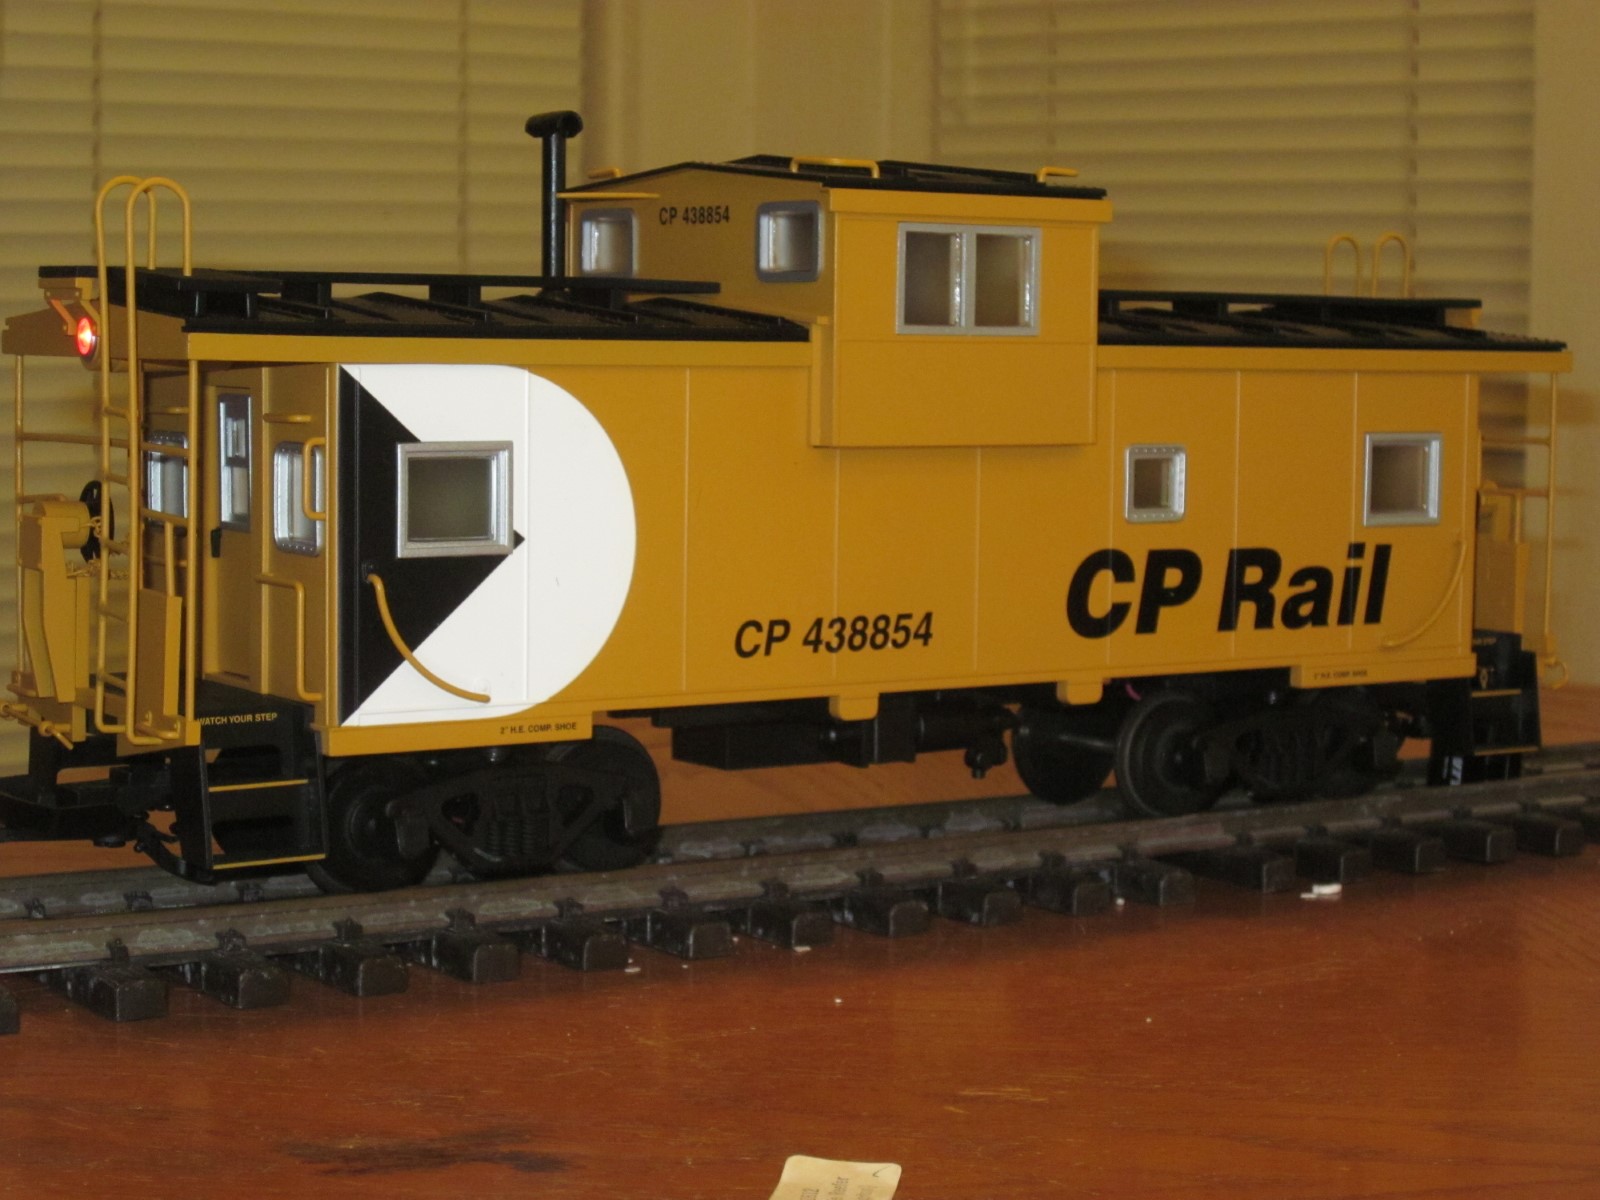 R12119 Canadian Pacific CP 438854